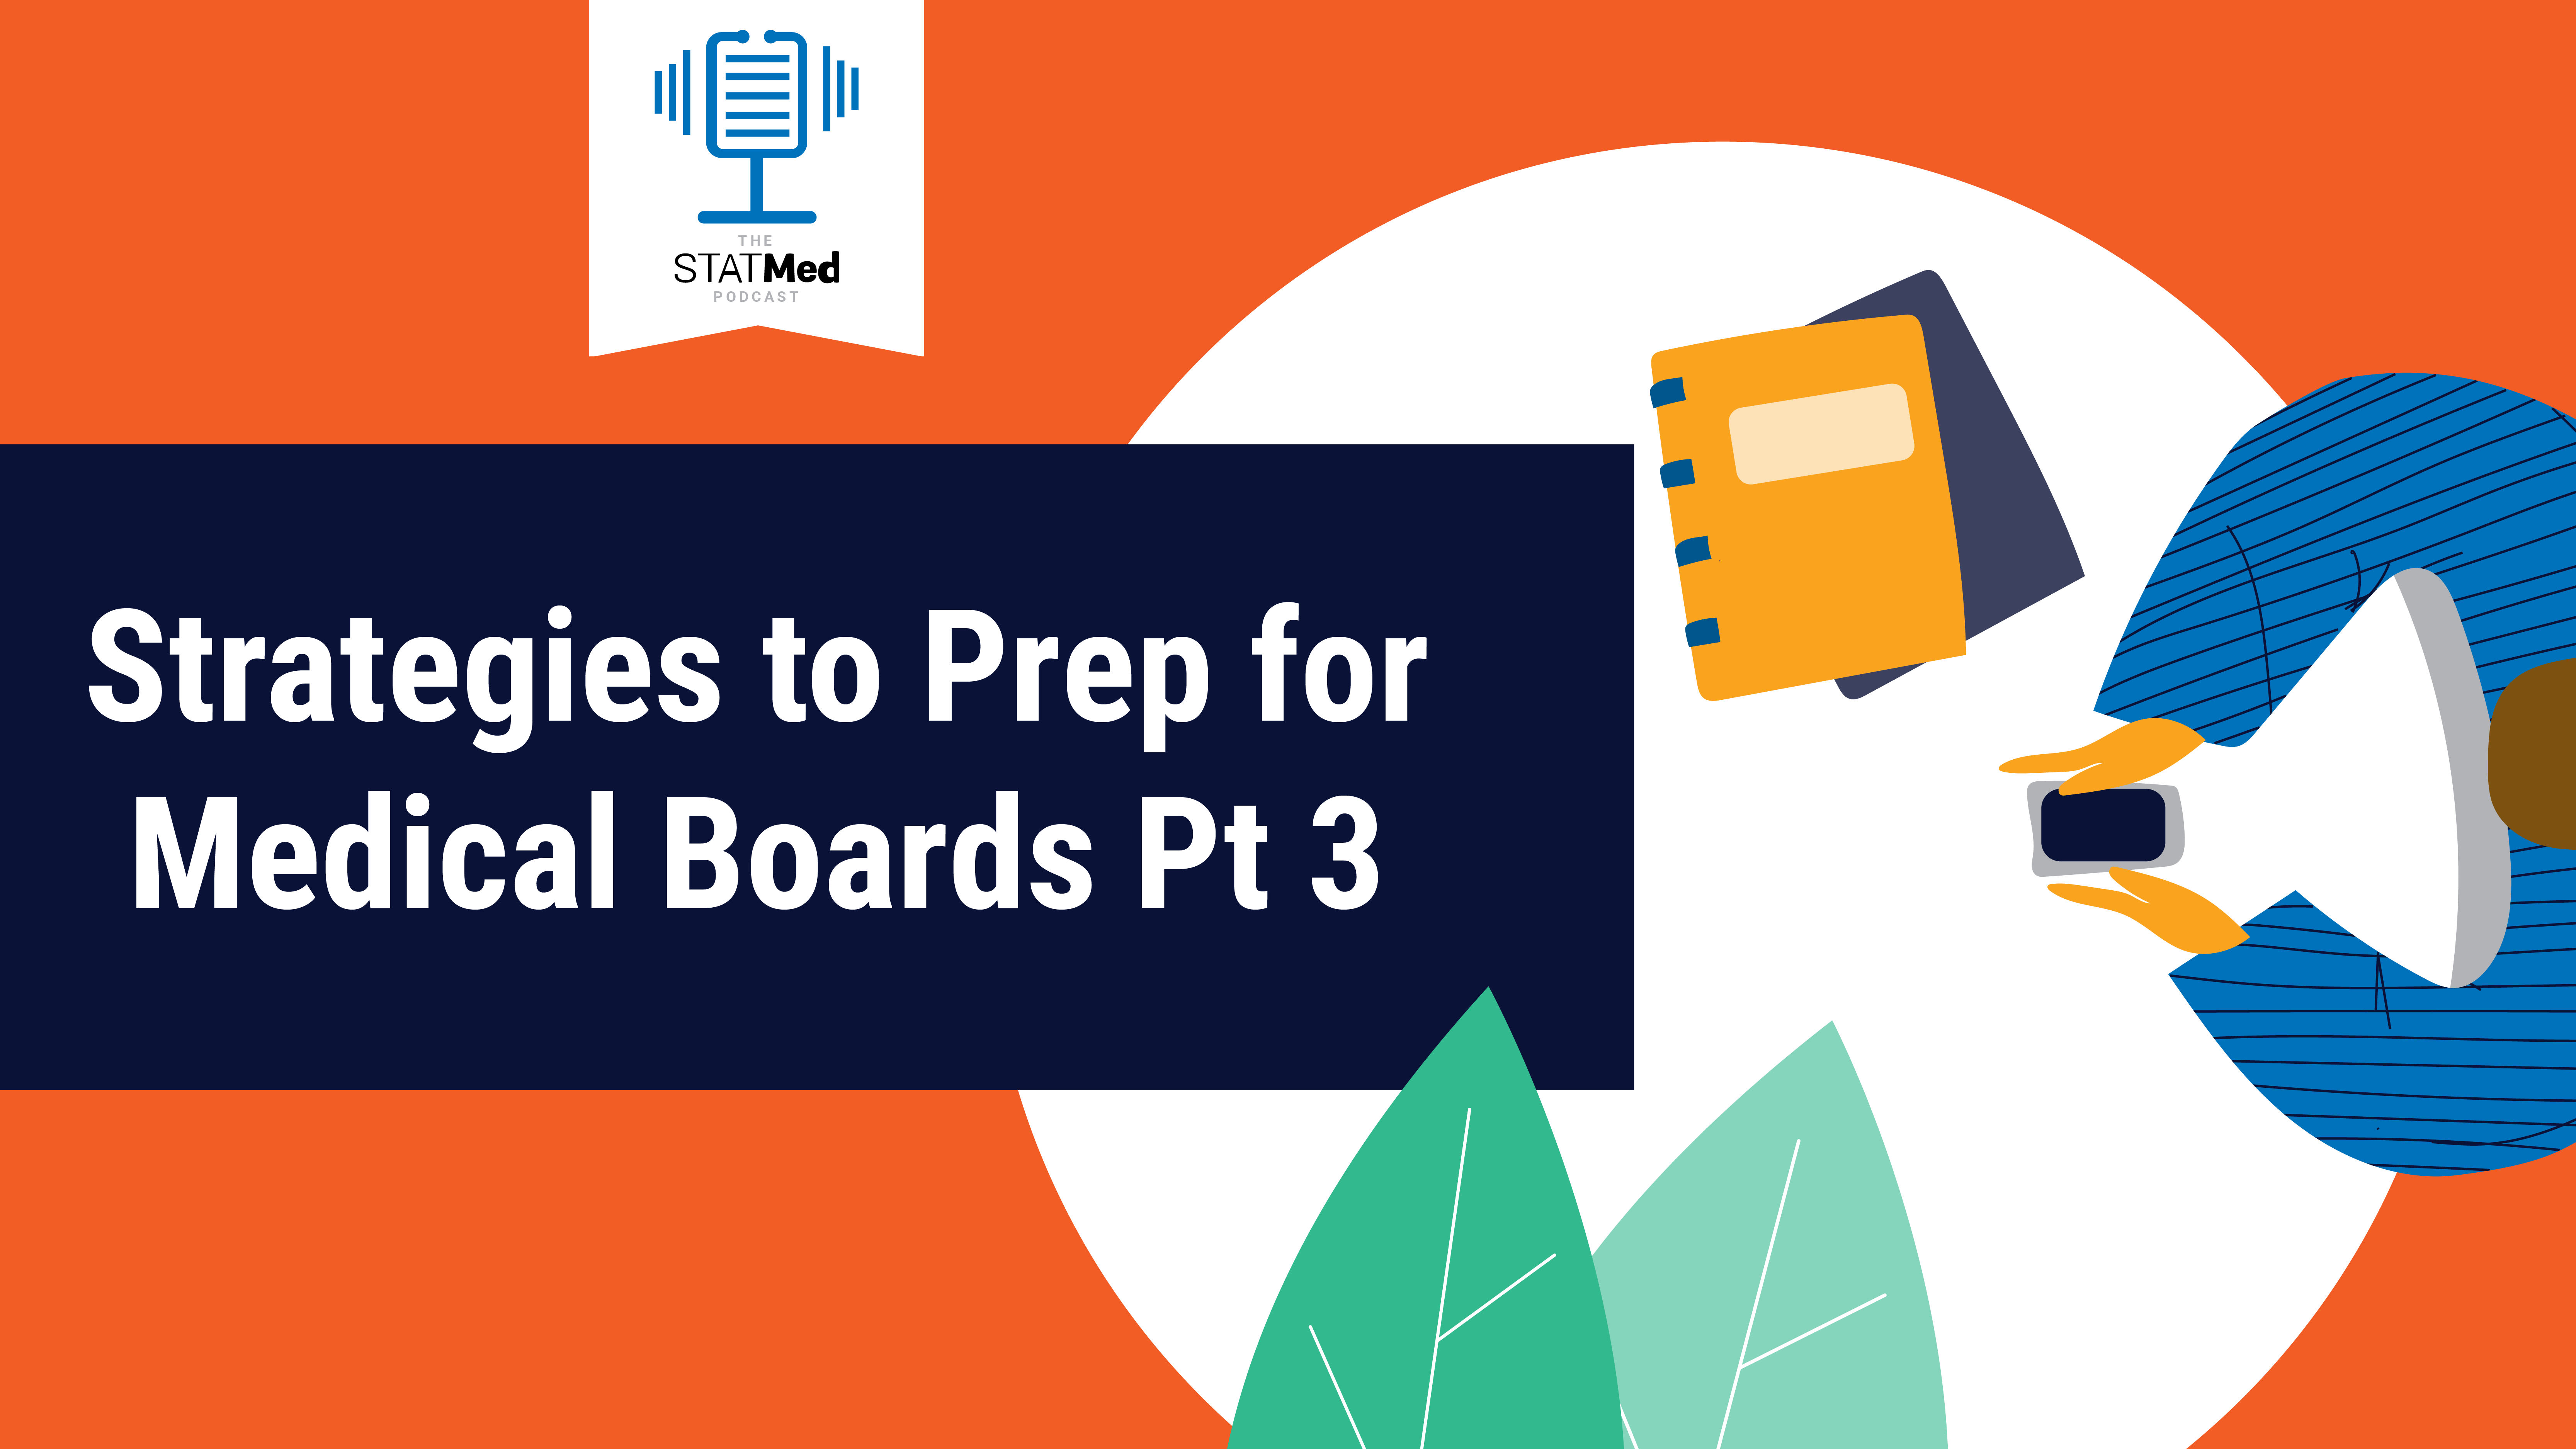 Featured image for “On the STATMed Podcast: Strategies to Prep for Medical Boards Pt 3”